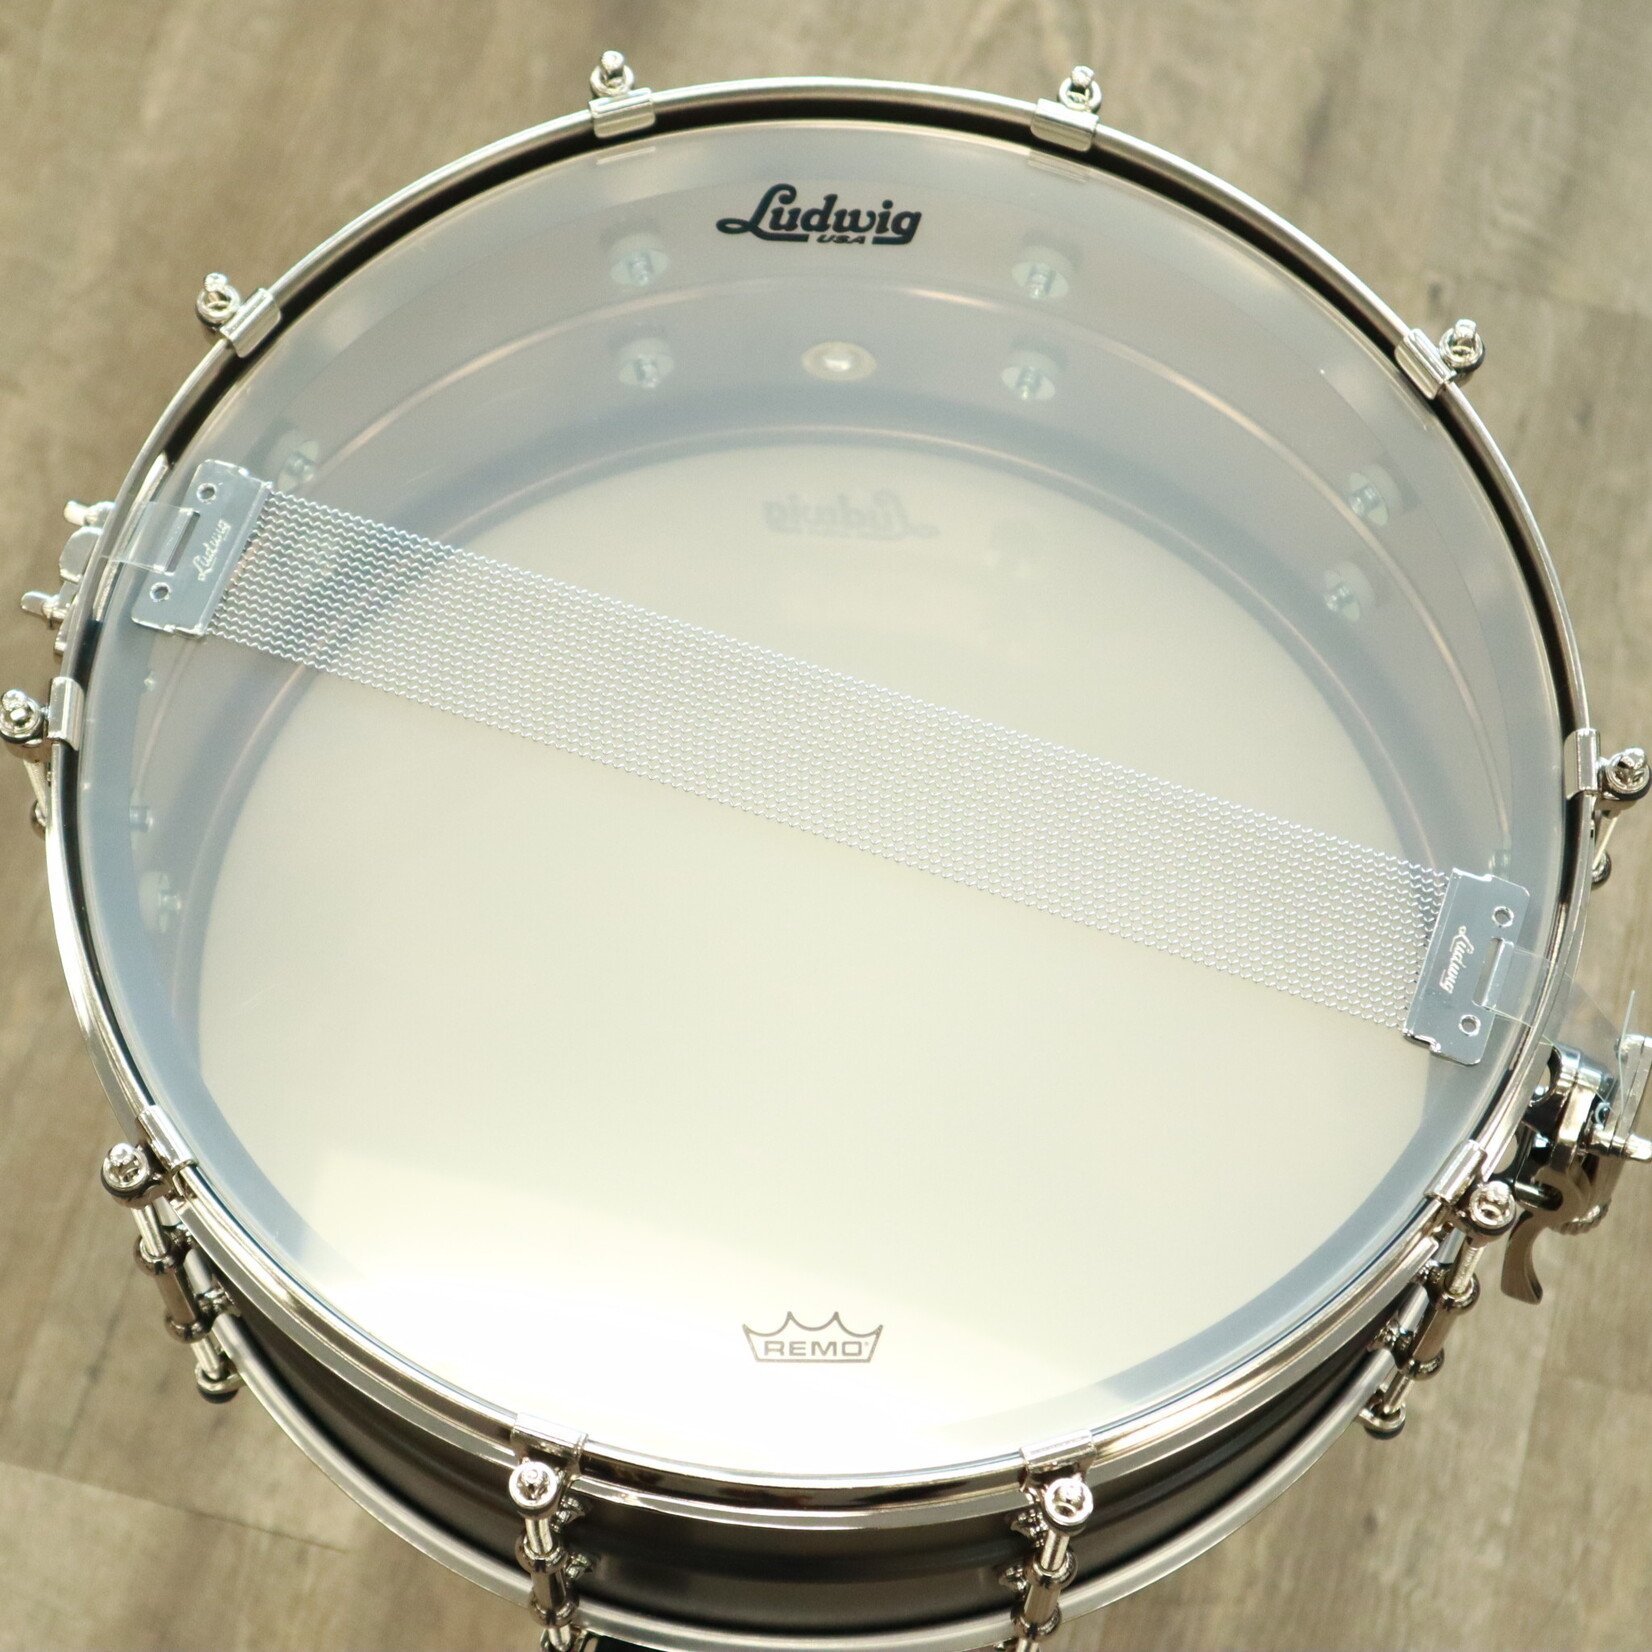 Ludwig Ludwig 6.5x14" Limited Edition "Satin De Luxe" Snare Drum (Satin Black over Brass, Tube Lugs, Single Flanged Hoop, Nickel Plated Hardware)